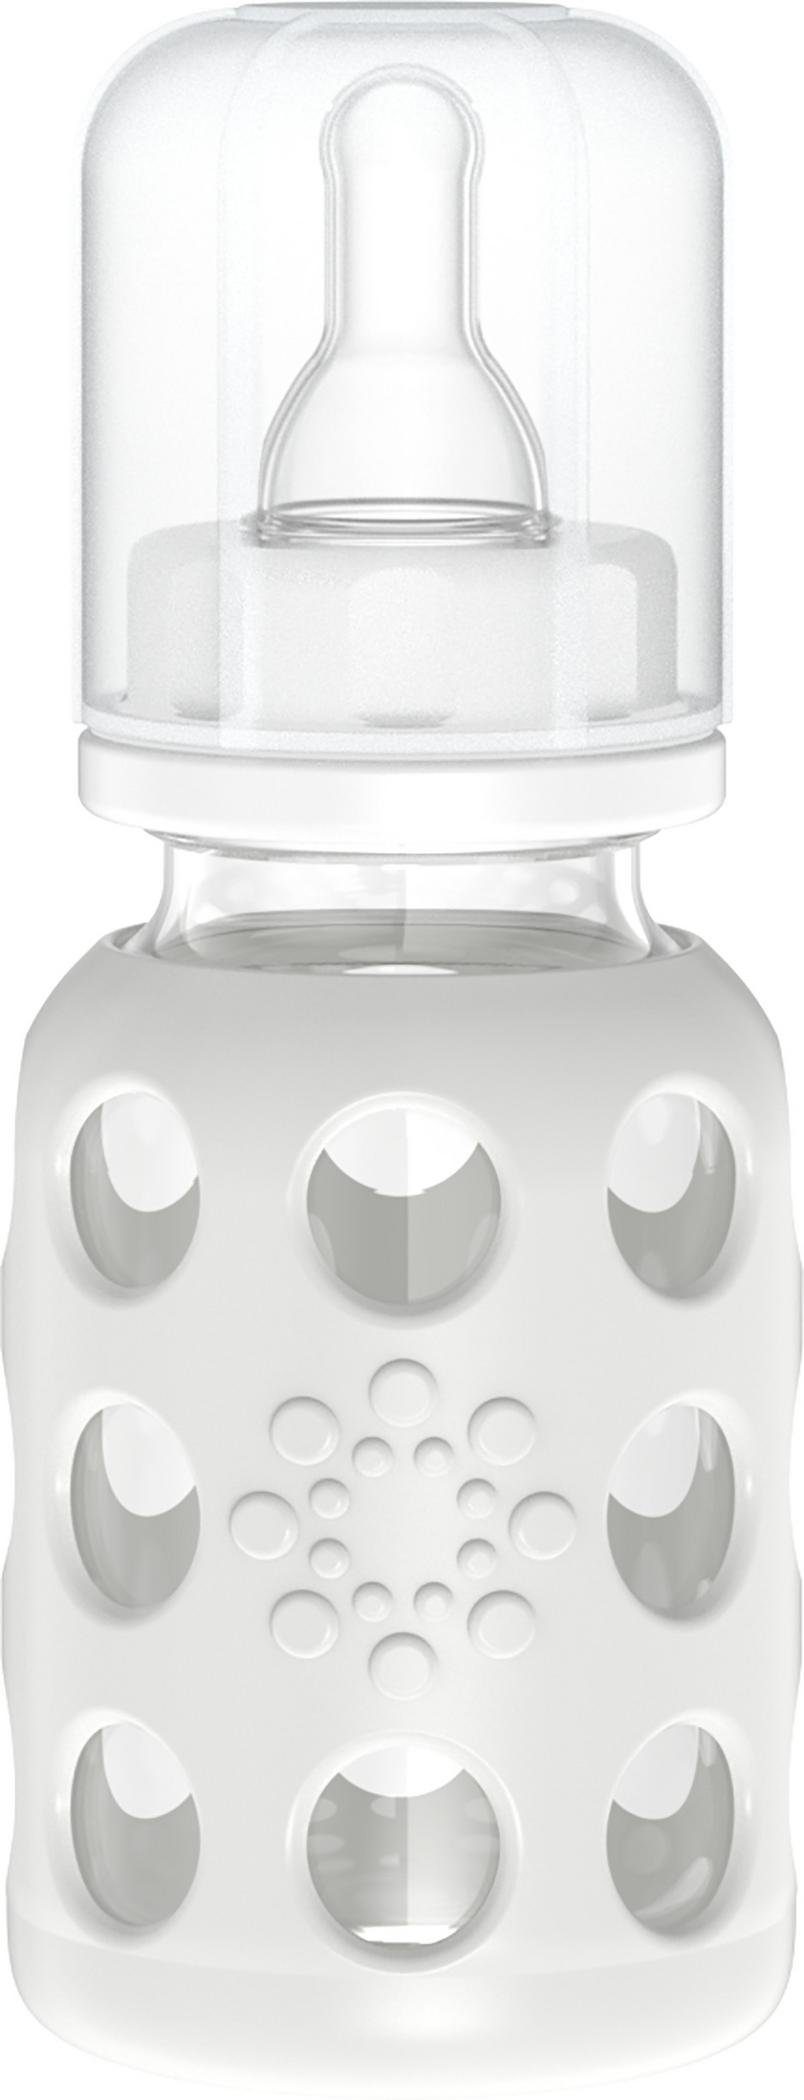 Lifefactory Babyflasche, Glasflasche 120ml, inkl. Silikonsauger Gr. 1 (0-3 Monate) Cool Grey | 